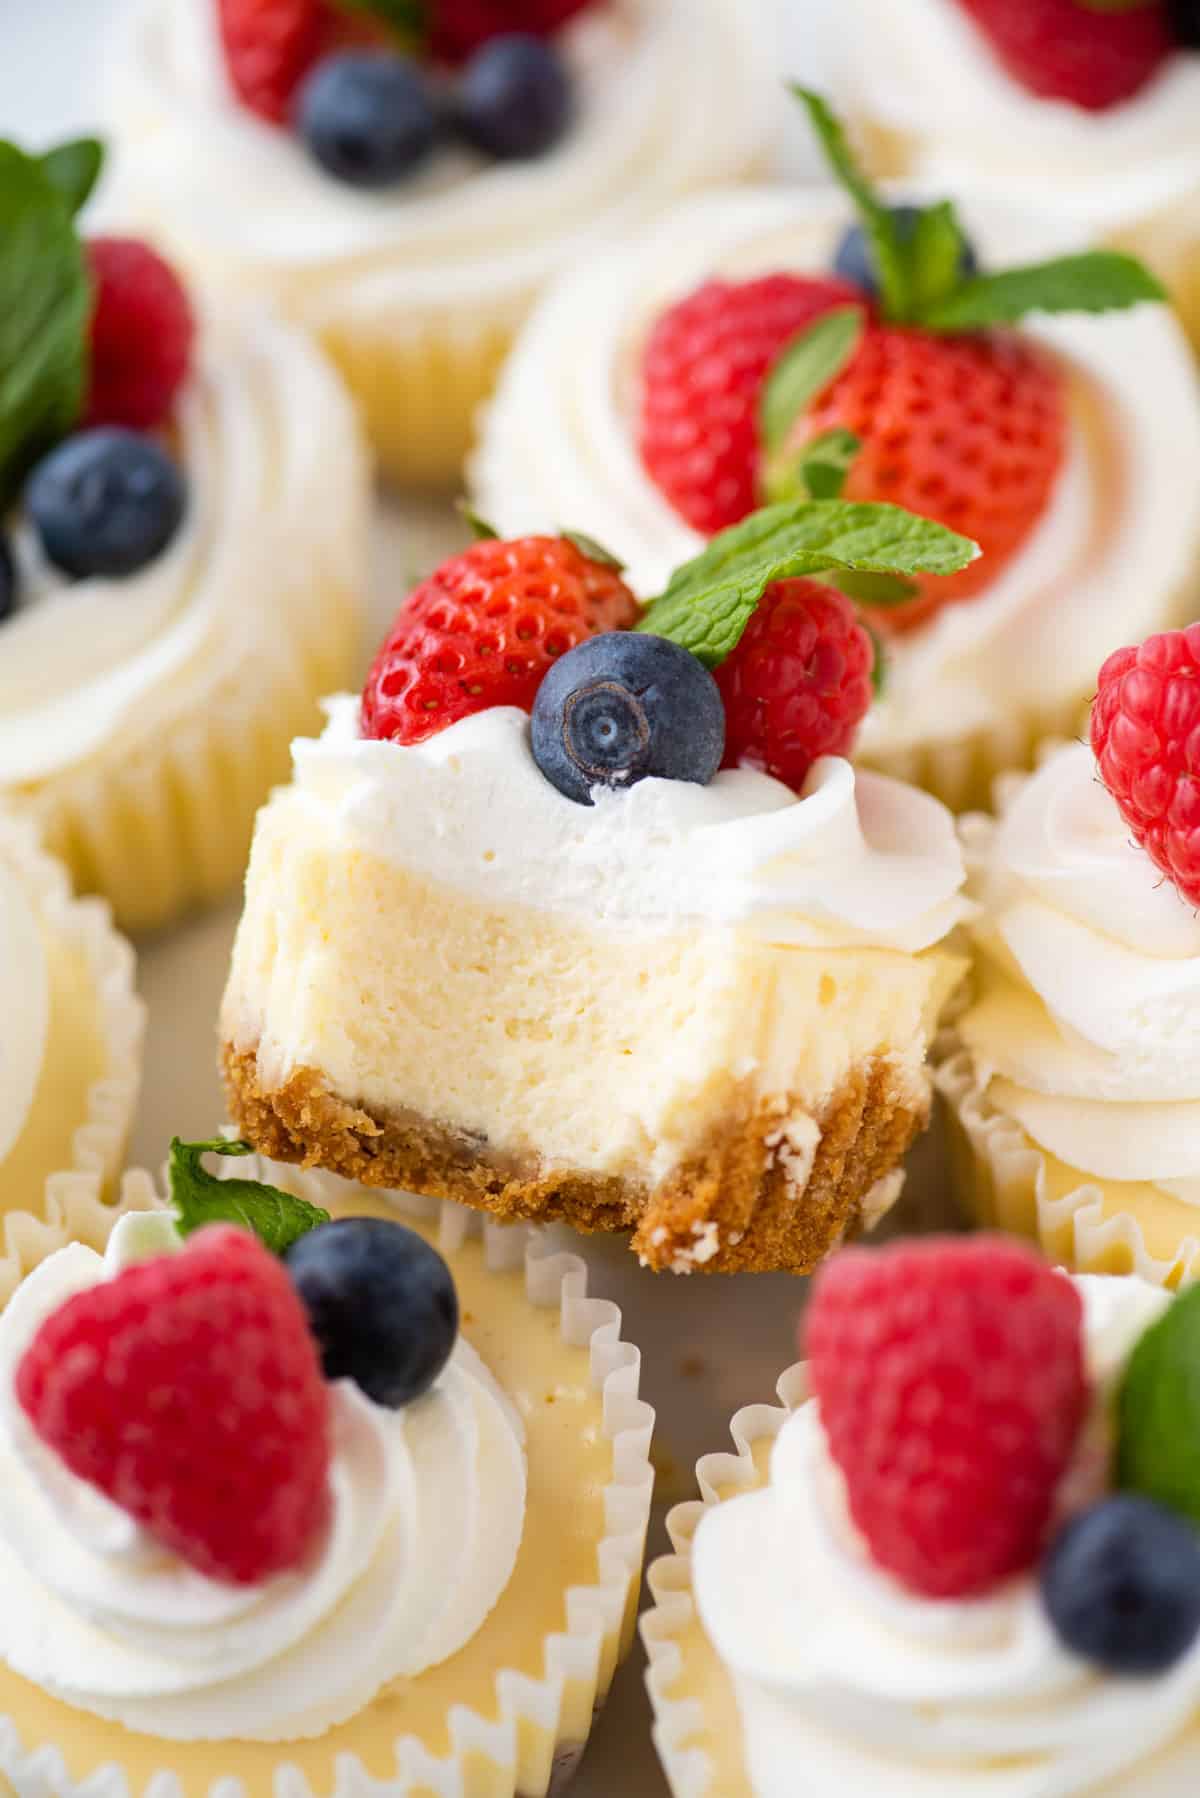 Mini cheesecakes garnished with whipped cream, fresh berries, and mint leaves